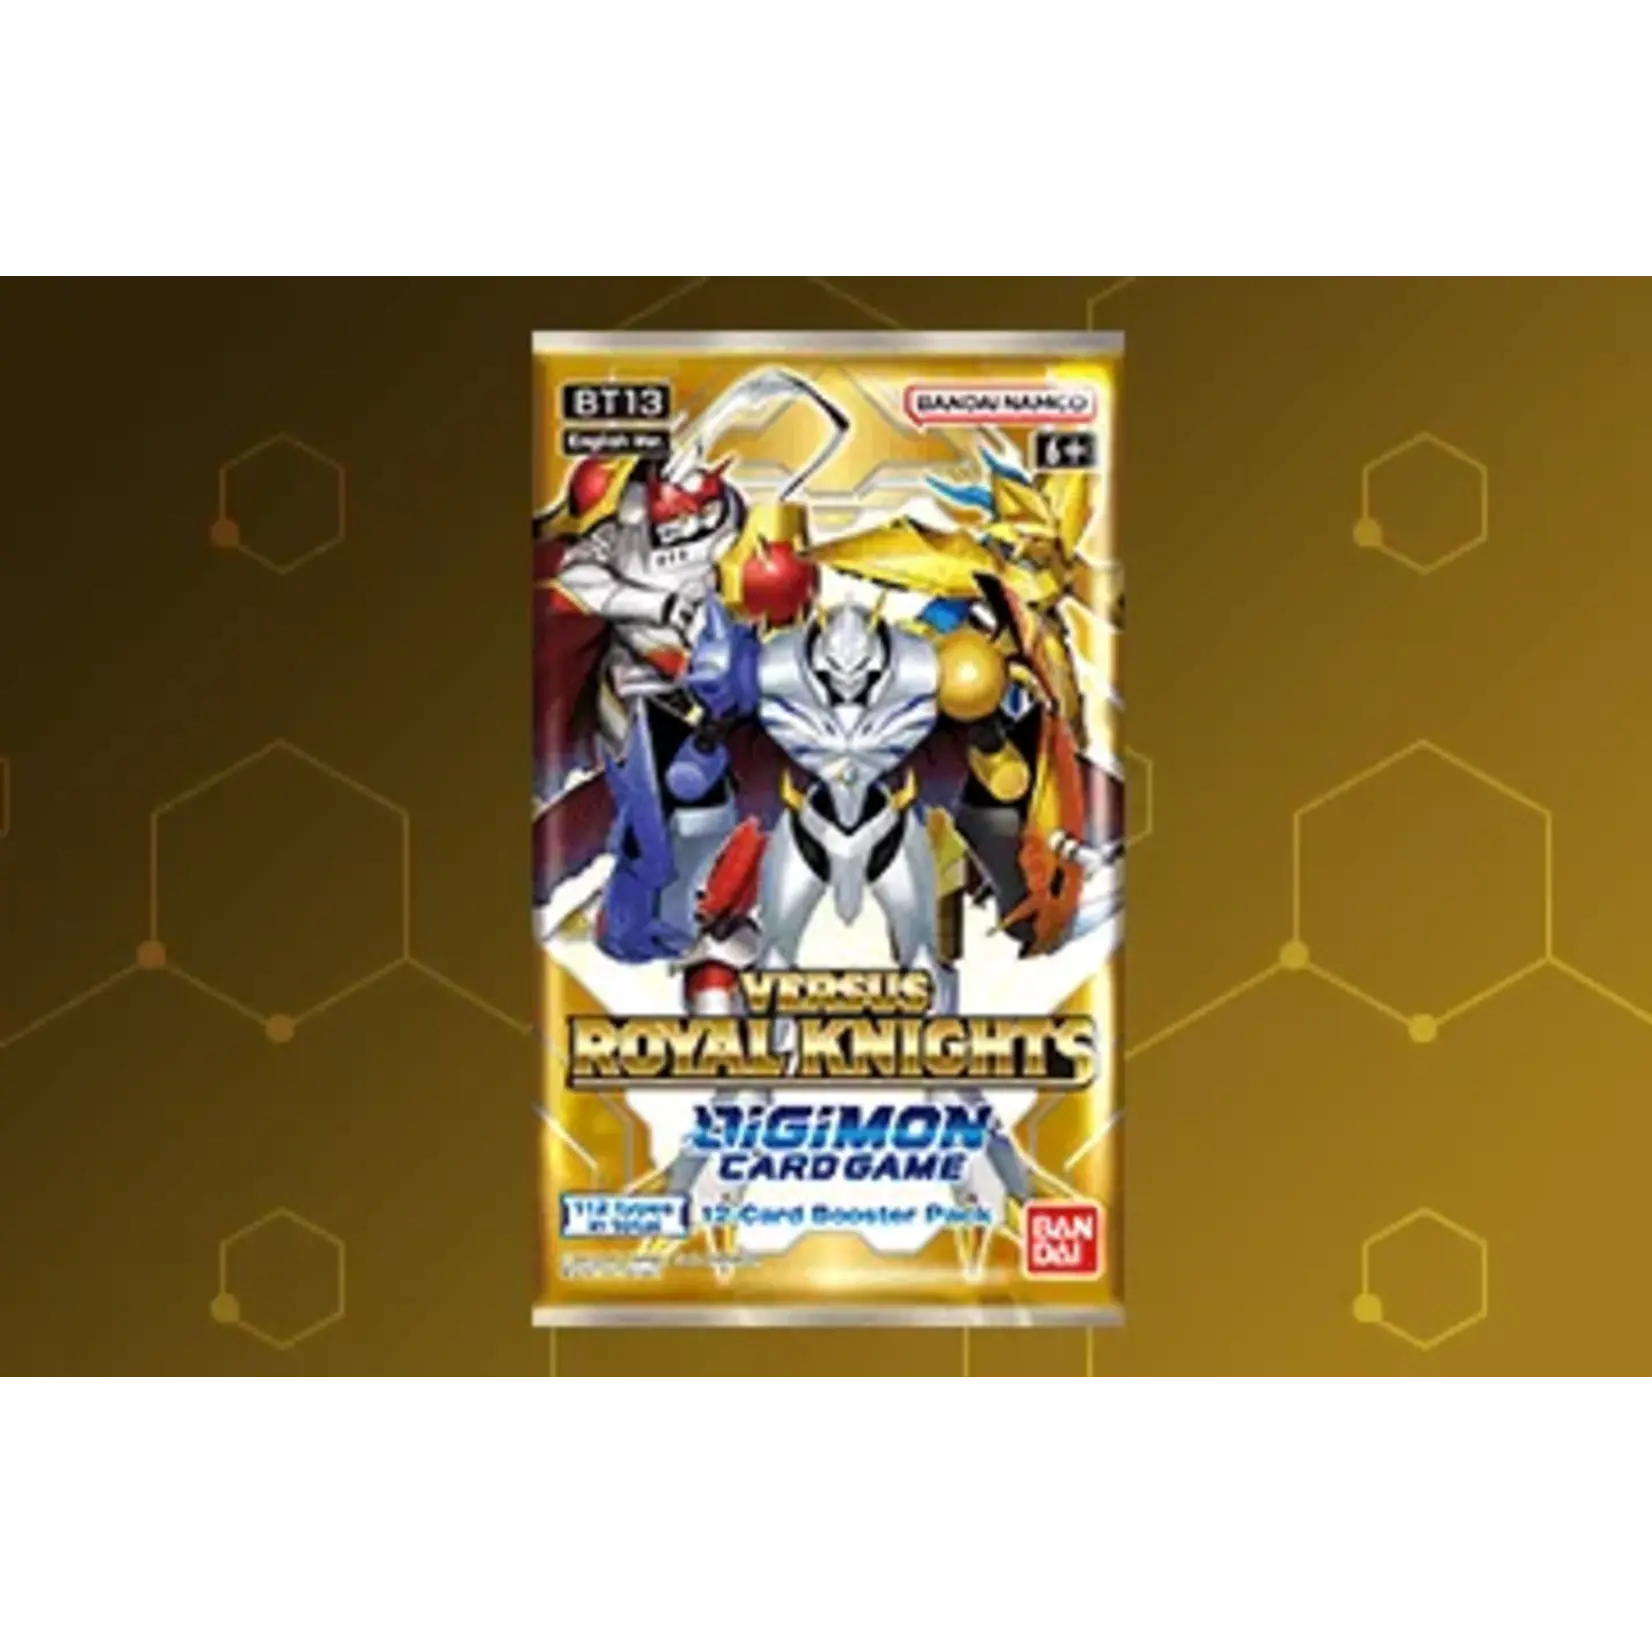 Digimon: Versus Royal Knight Booster Pack (BT13)